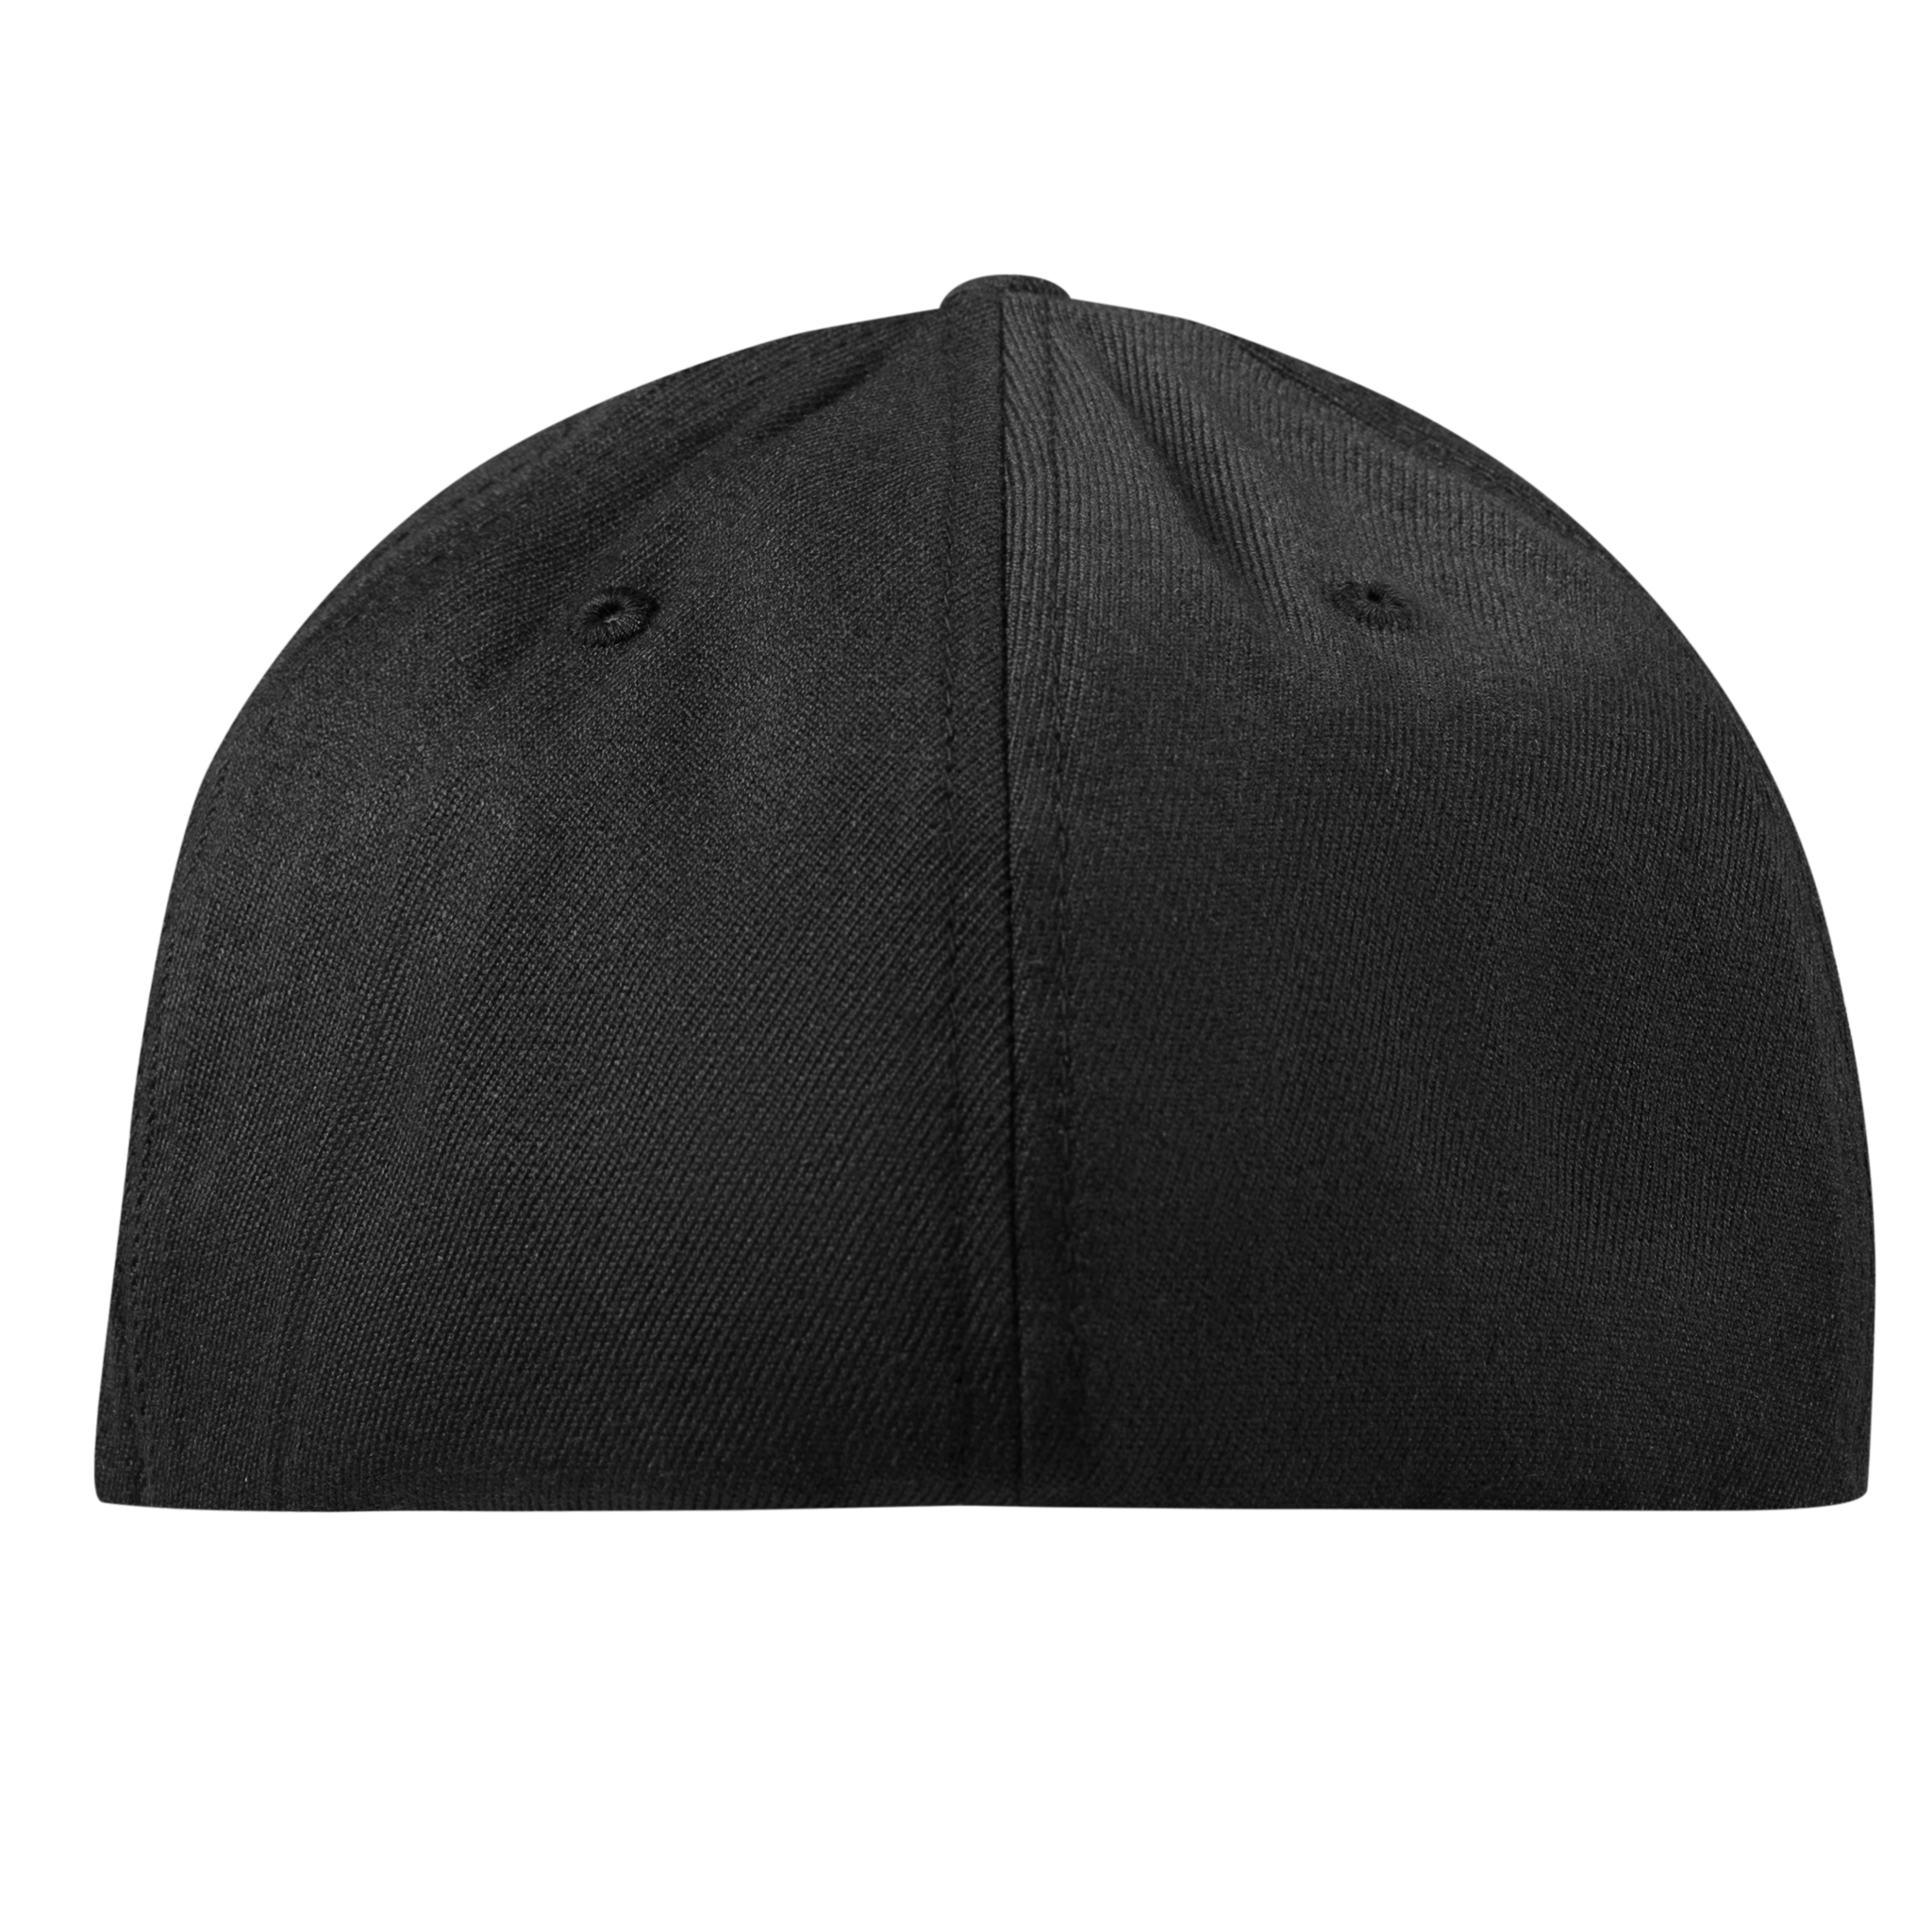 1776 Midnight Flexfit Fitted Back Black